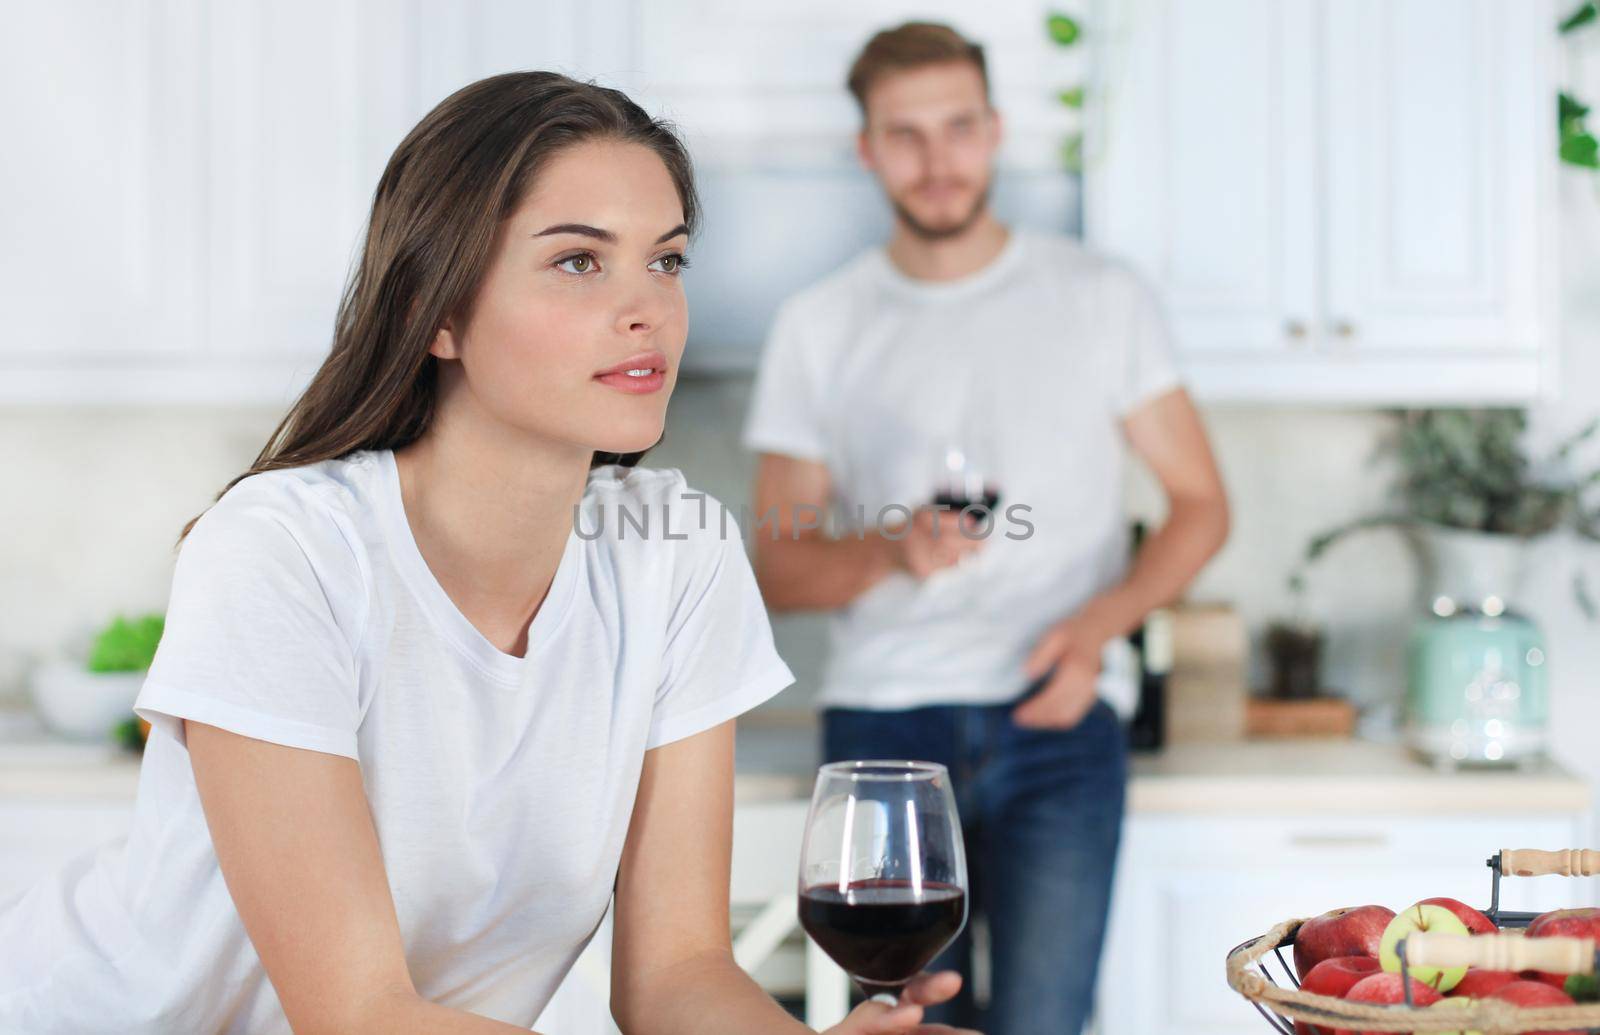 Pretty young woman drinking some wine at home in kitchen.